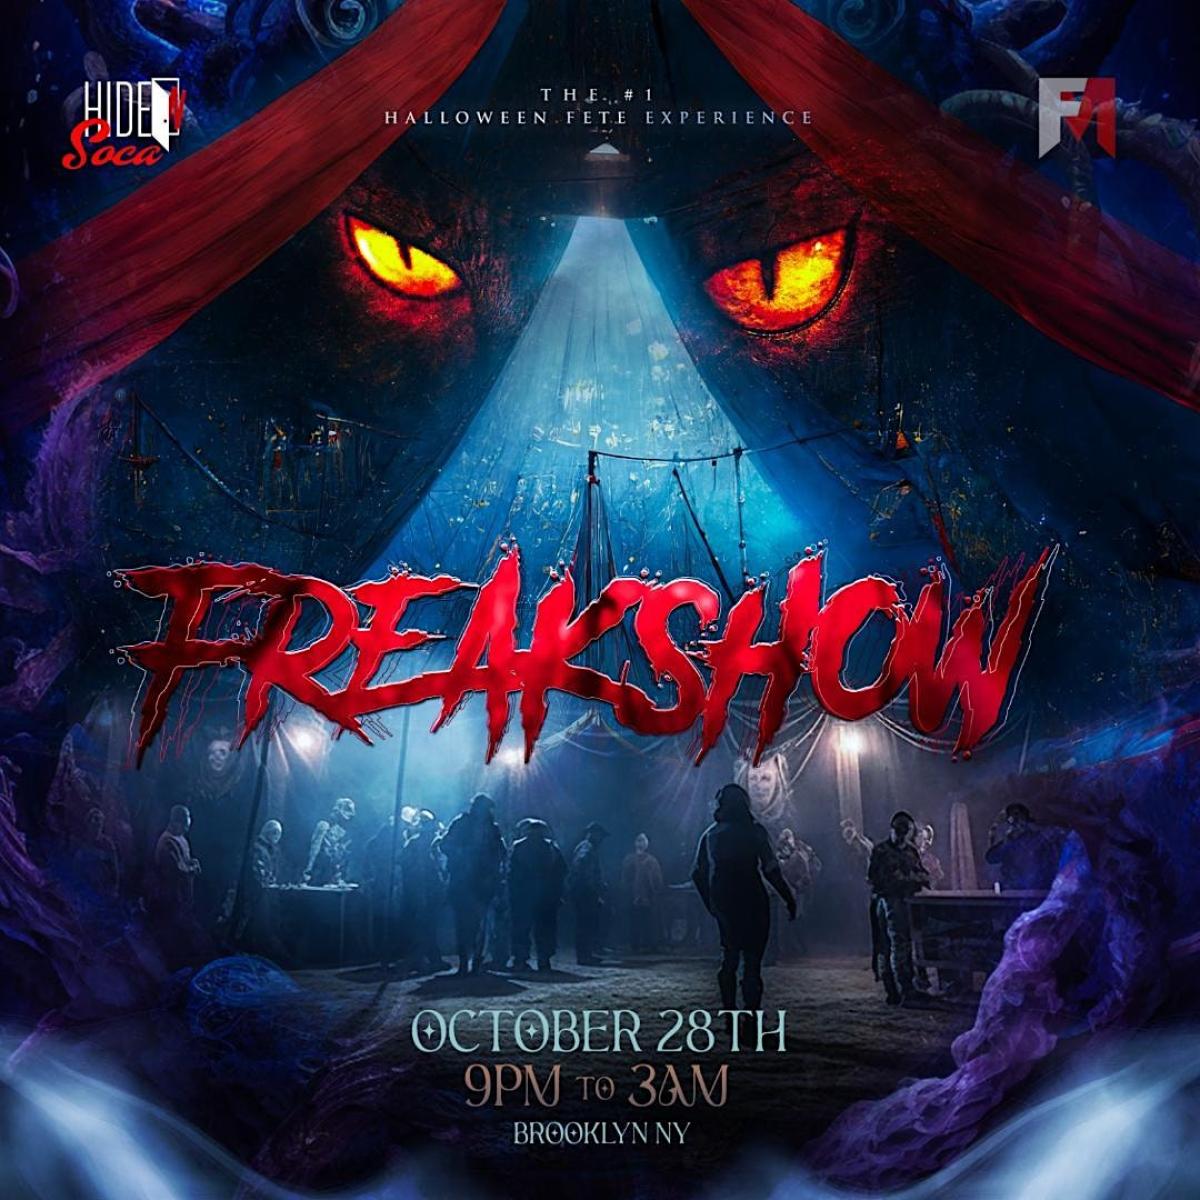 Freak Show flyer or graphic.